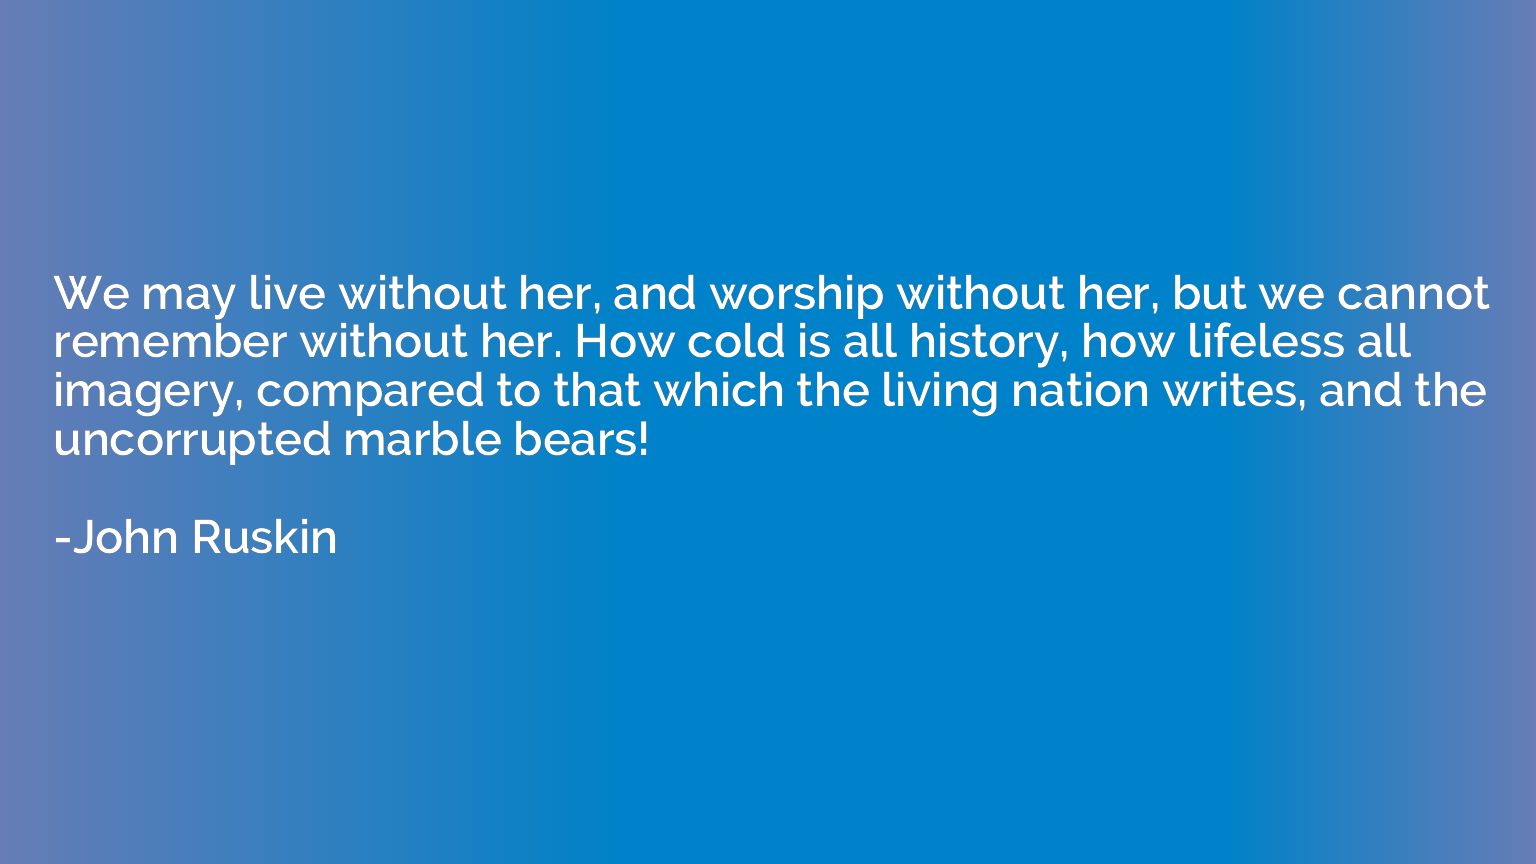 We may live without her, and worship without her, but we can